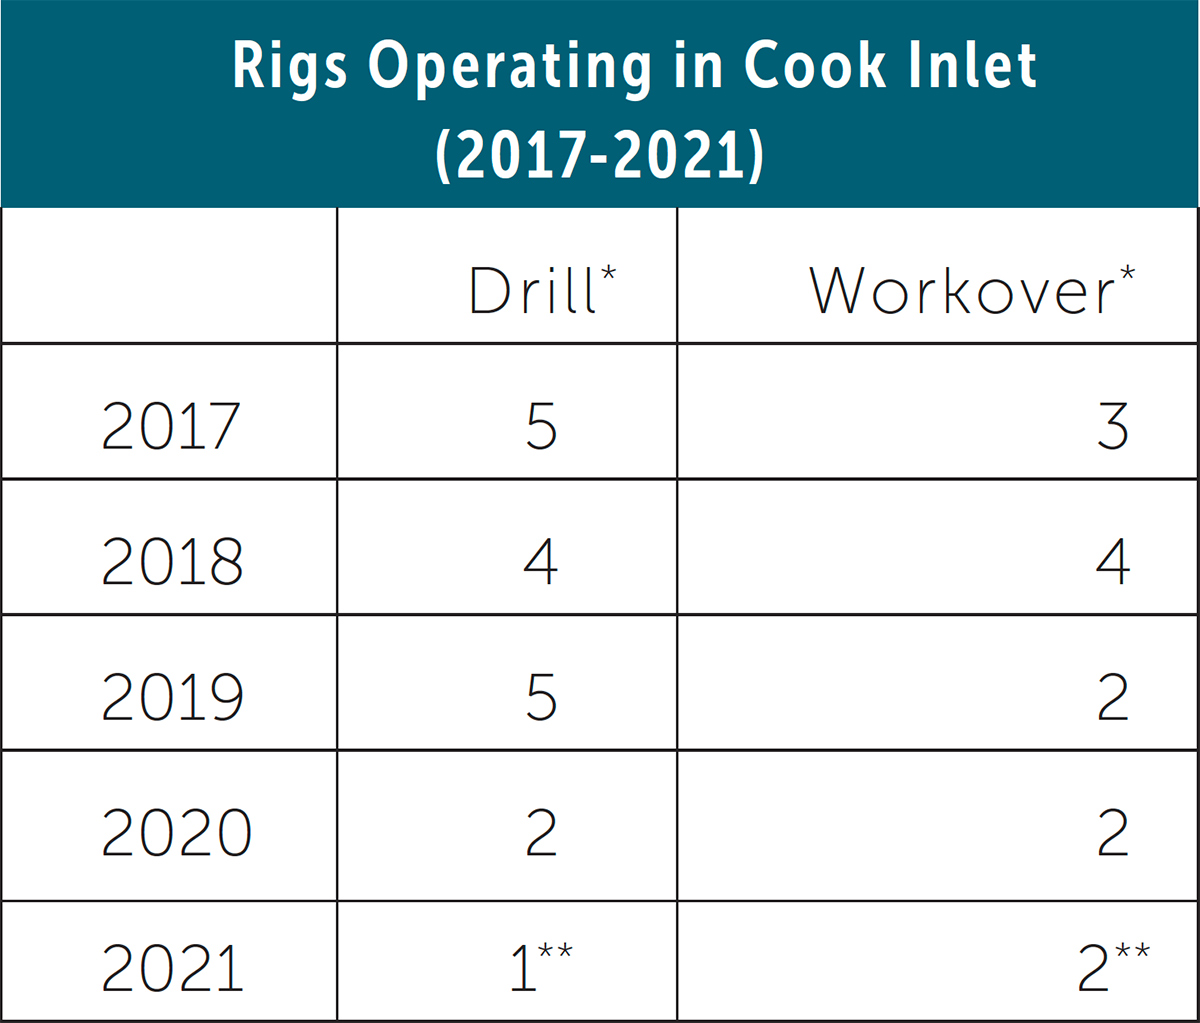 Rigs Operating in Cook Inlet chart for the years 2017-2021